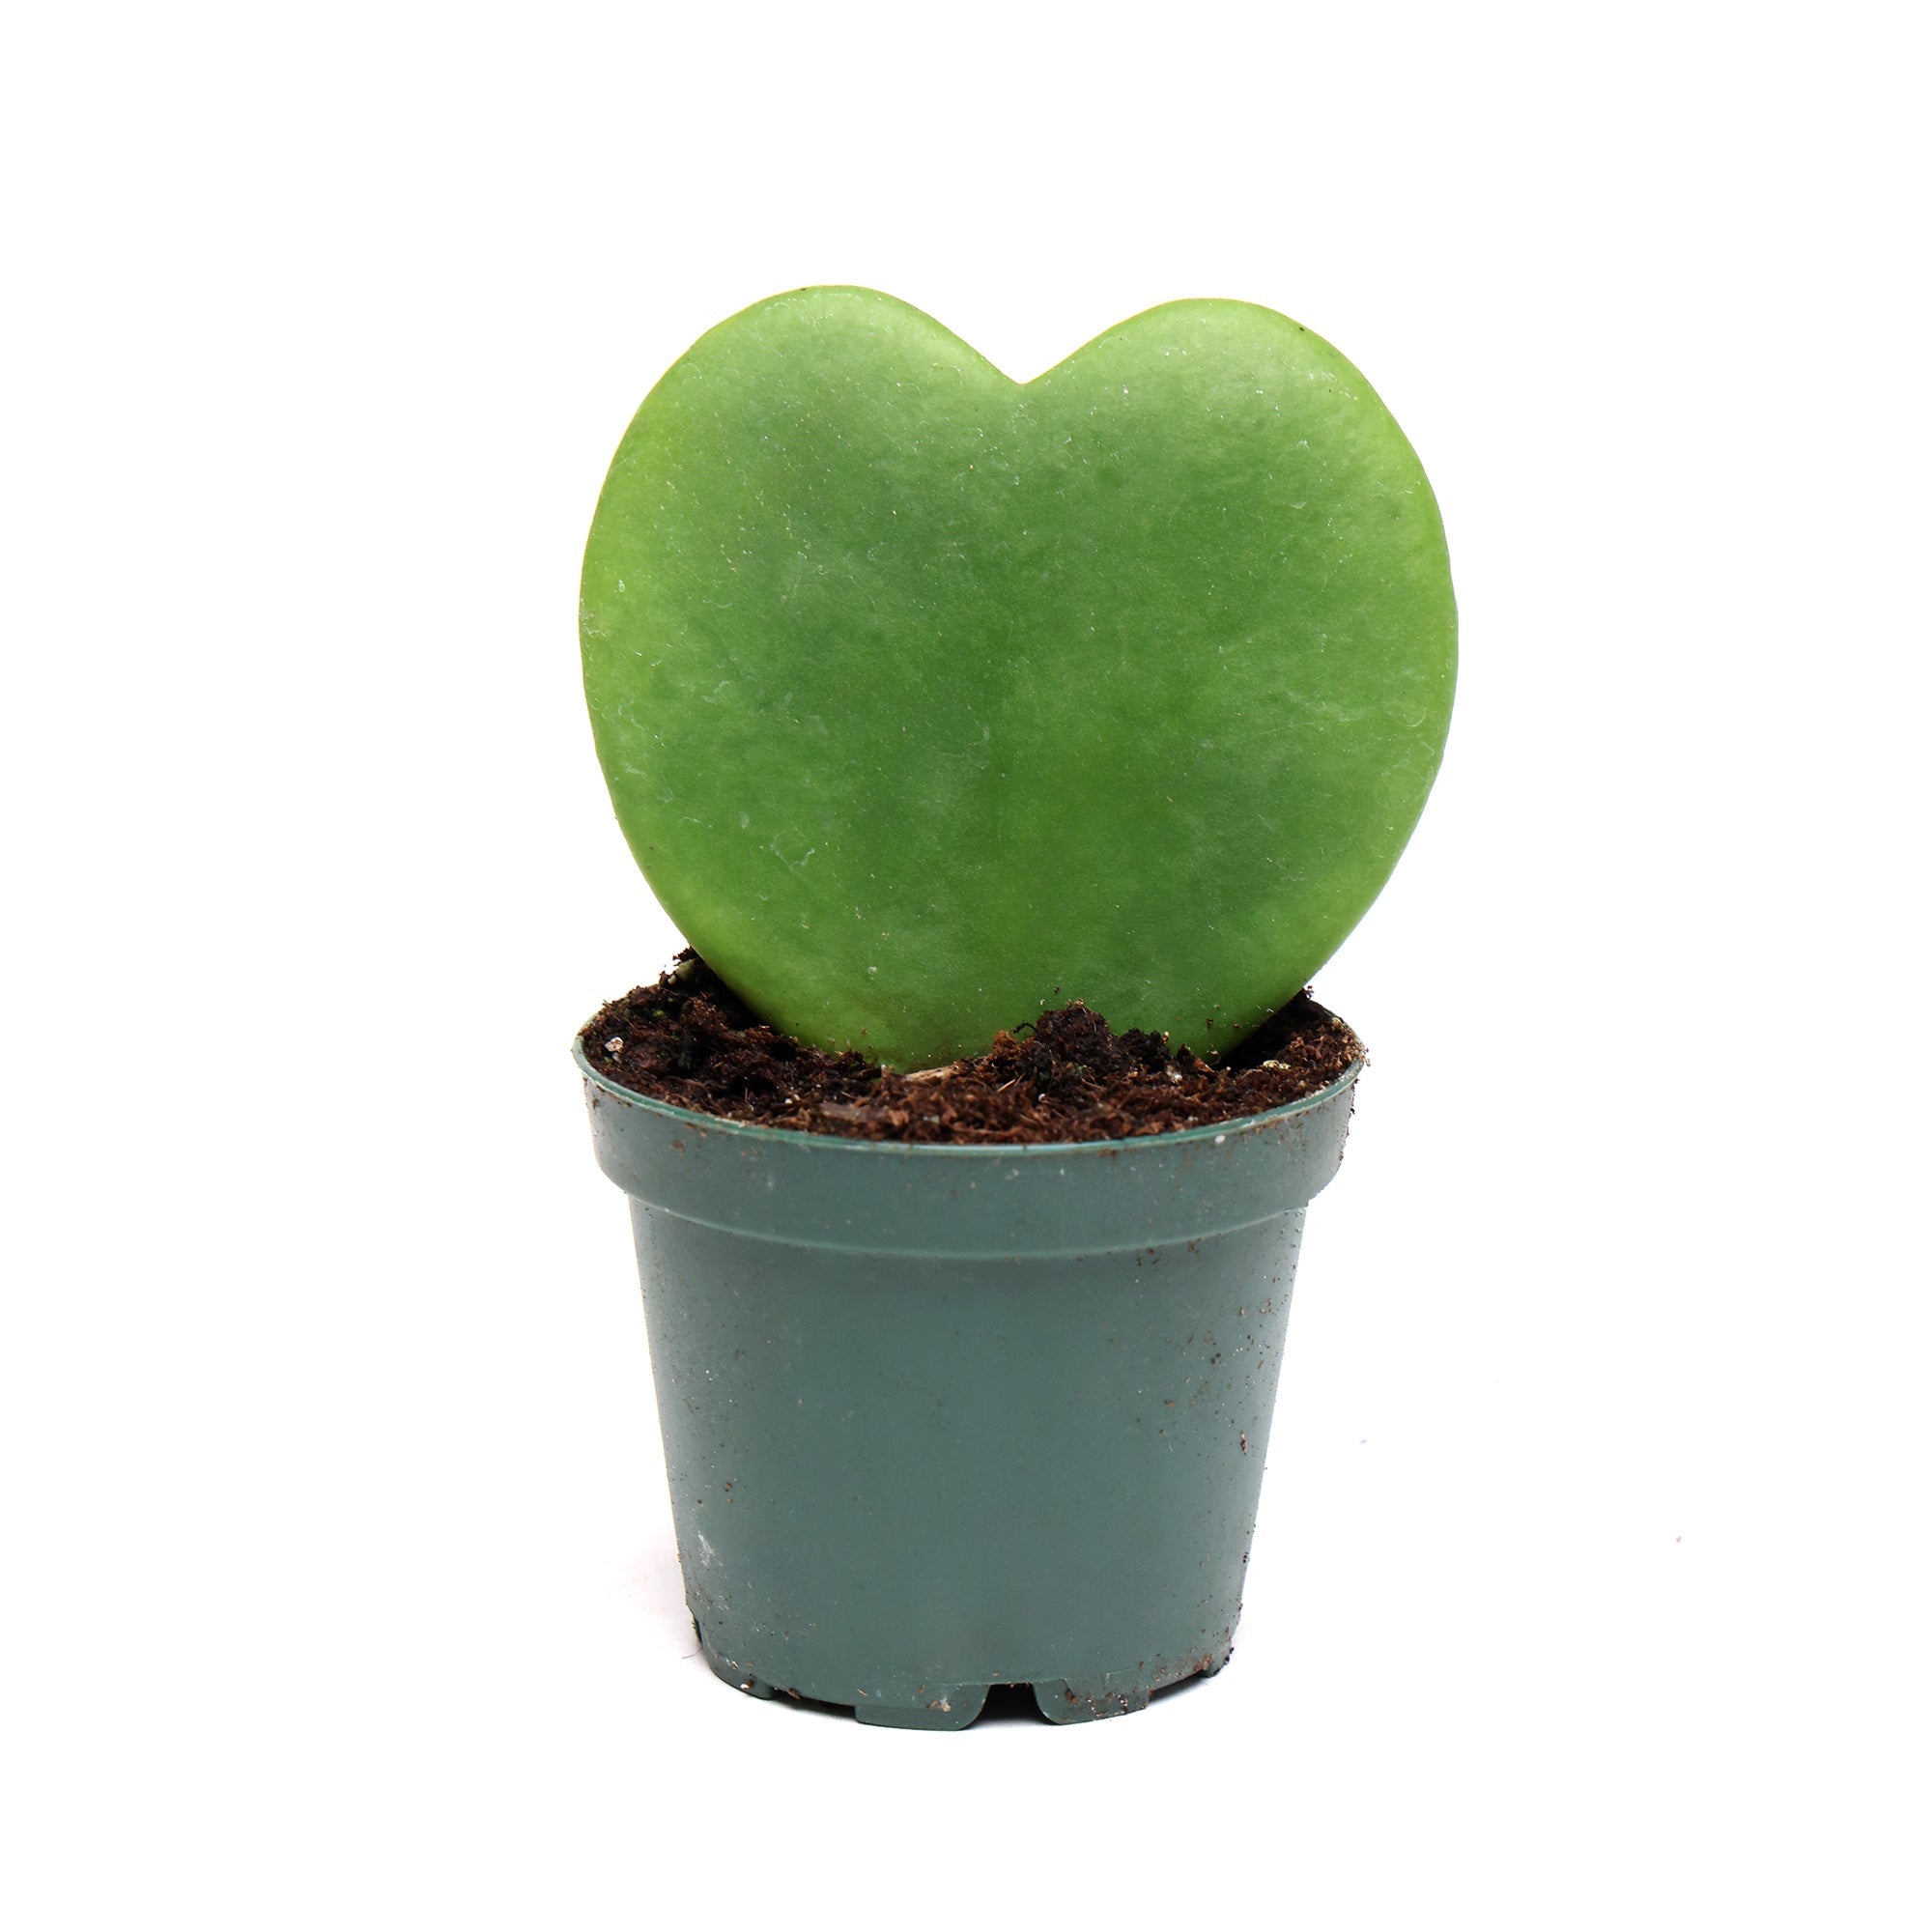 A small green Hoya Kerri 2 Inch Pot by Chive Studio 2024, also known as a heart-shaped succulent, stands proudly in a simple green plastic pot. The single, thick, heart-shaped leaf is vibrant and healthy in its soil mixture. This charming houseplant not only adds beauty but also contributes to air purification. The background is plain white.